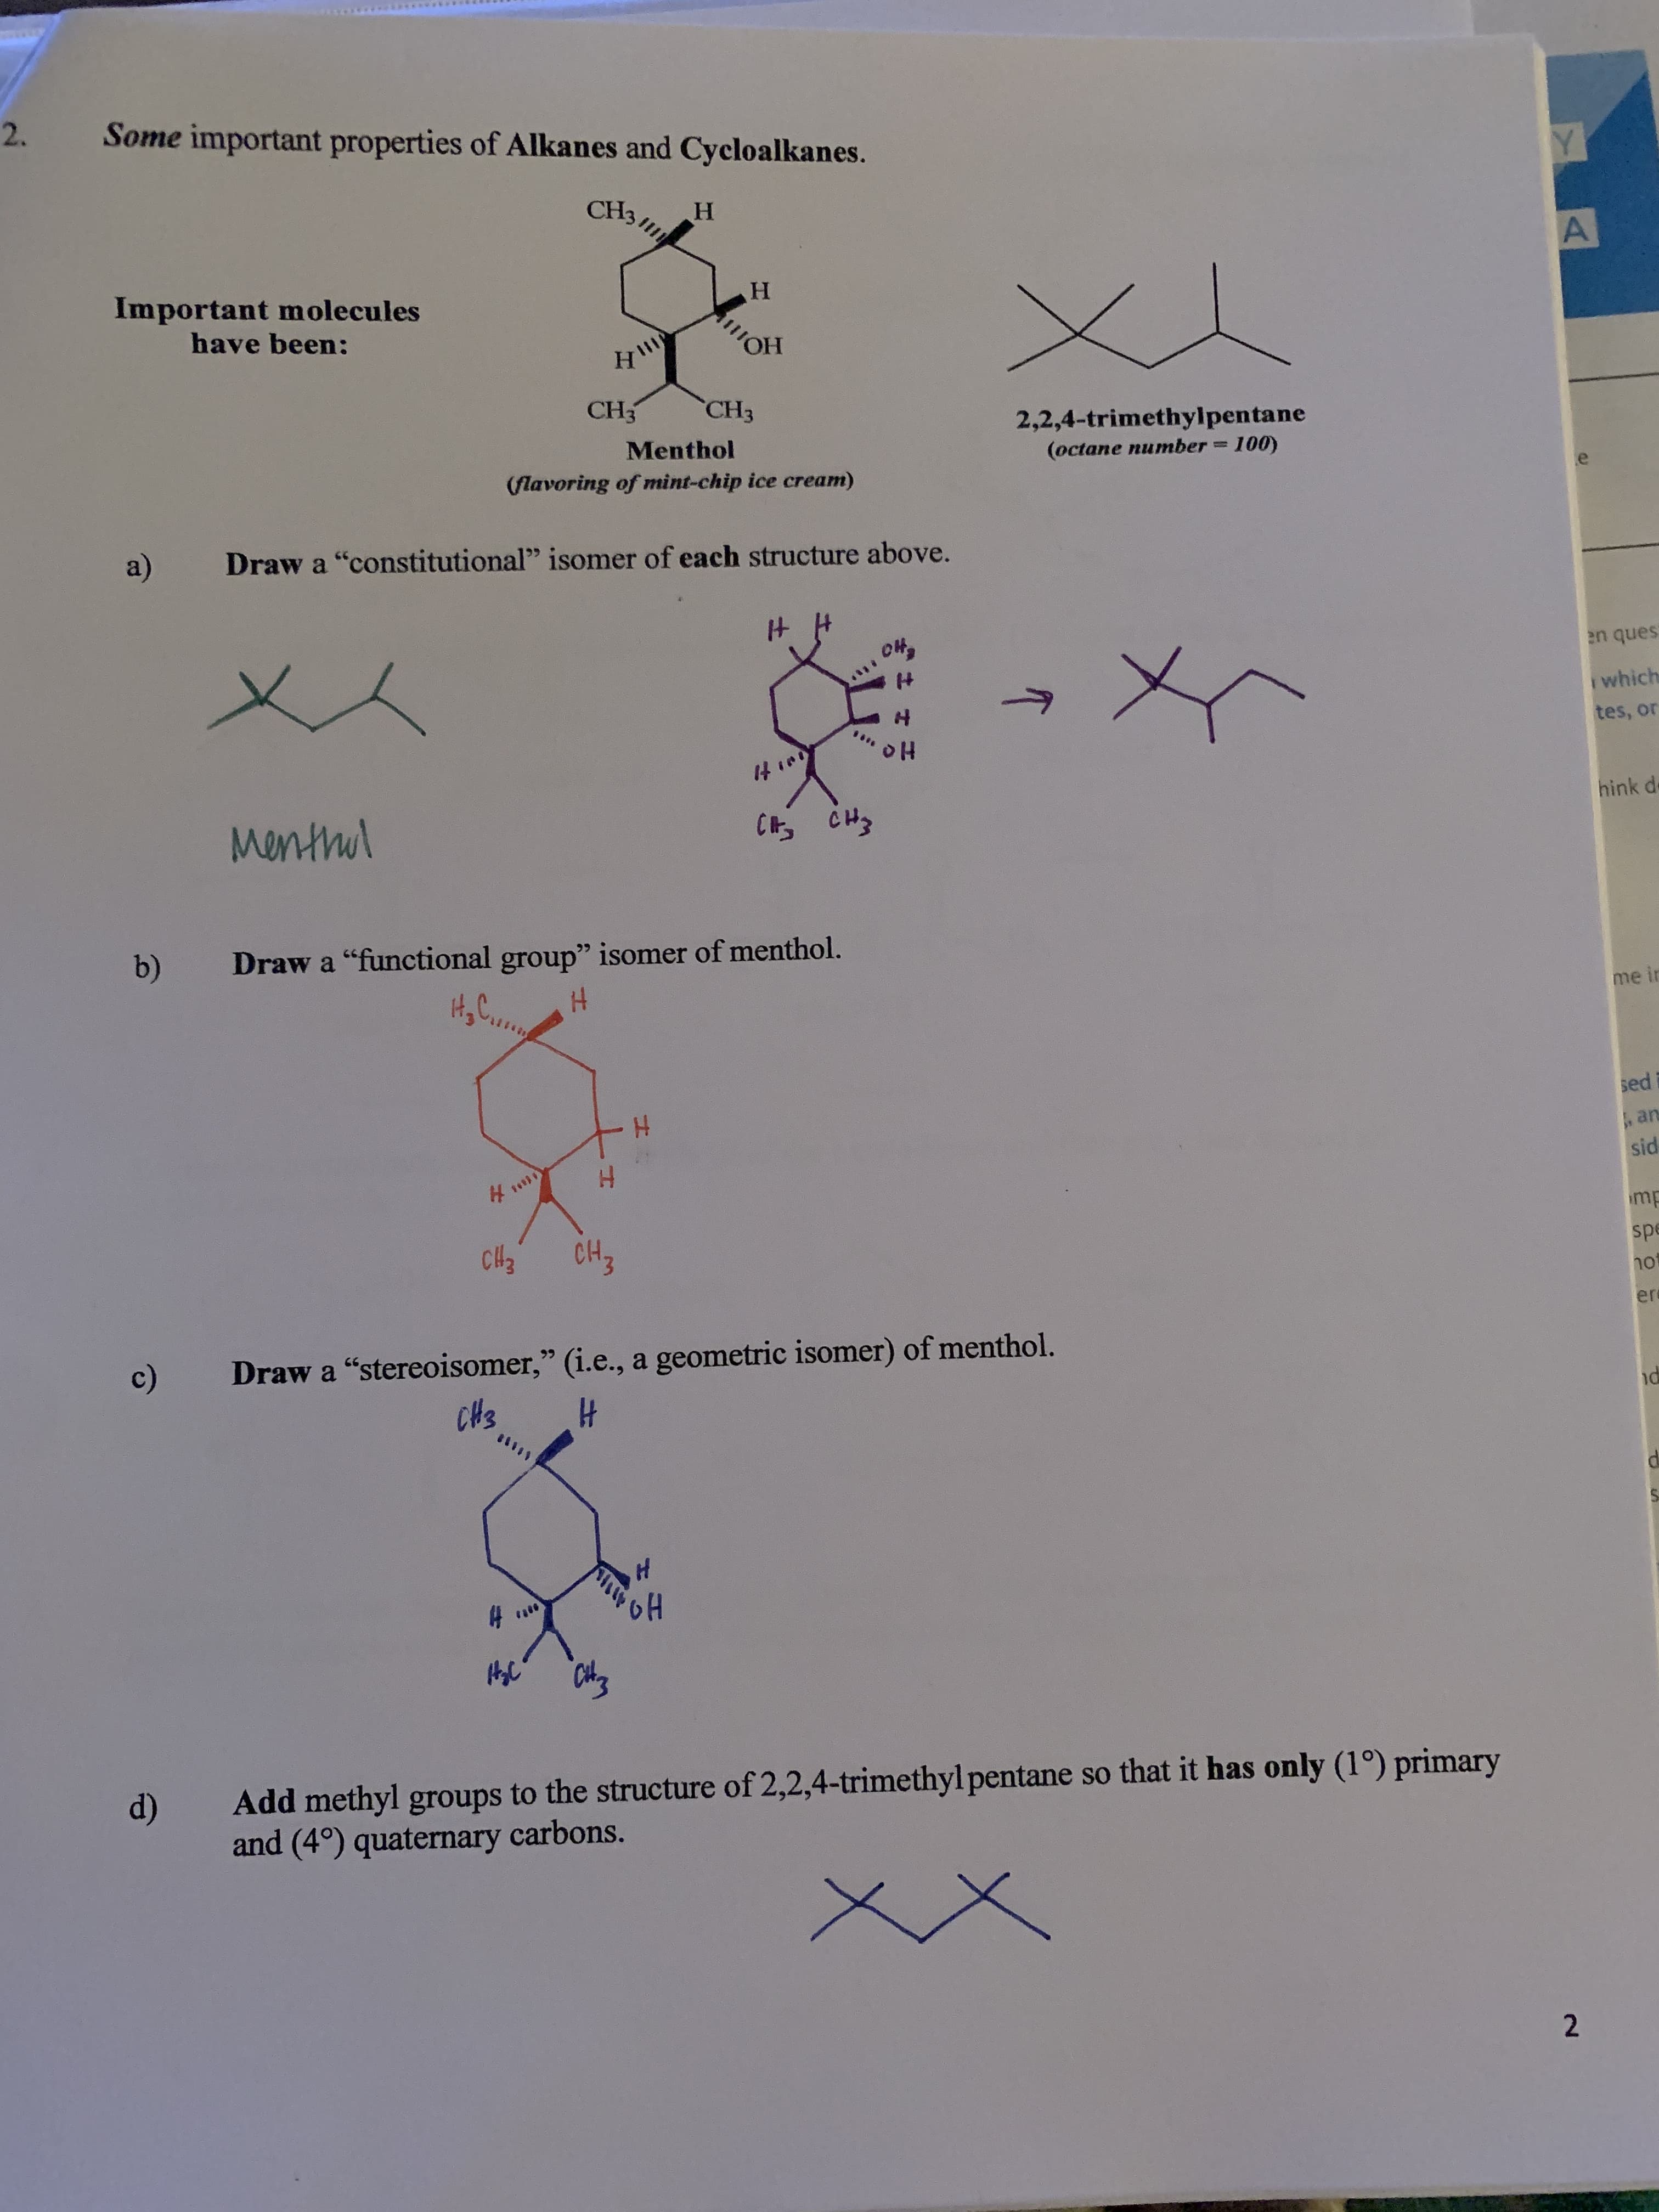 2.
Some important properties of Alkanes and Cycloalkanes.
Y
CH3
н
A
Important m olecules
н
Кто
have been:
OH
CH3
"CHЗ
2,2,4-trimethylpentane
(оctane number %3D100)
Menthol
(flavoring of mint-chip ice cream)
e
a)
Draw a "constitutional" isomer of each structure above.
он,
en ques
IH
which
tes, or
oH
Mentmul
C CH
hink d
b)
Draw a "functional group" isomer of menthol.
H,C.
H
me in
sed
an
sid
CH3
mp
сH,
hot
er
Draw a "stereoisomer," (i.e., a geometric isomer) of menthol.
c)
CHS
H
8*0
CAE
Add methyl groups to the structure of 2,2,4-trimethyl pentane so that it has only (1°) primary
and (4°) quaternary carbons.
2
